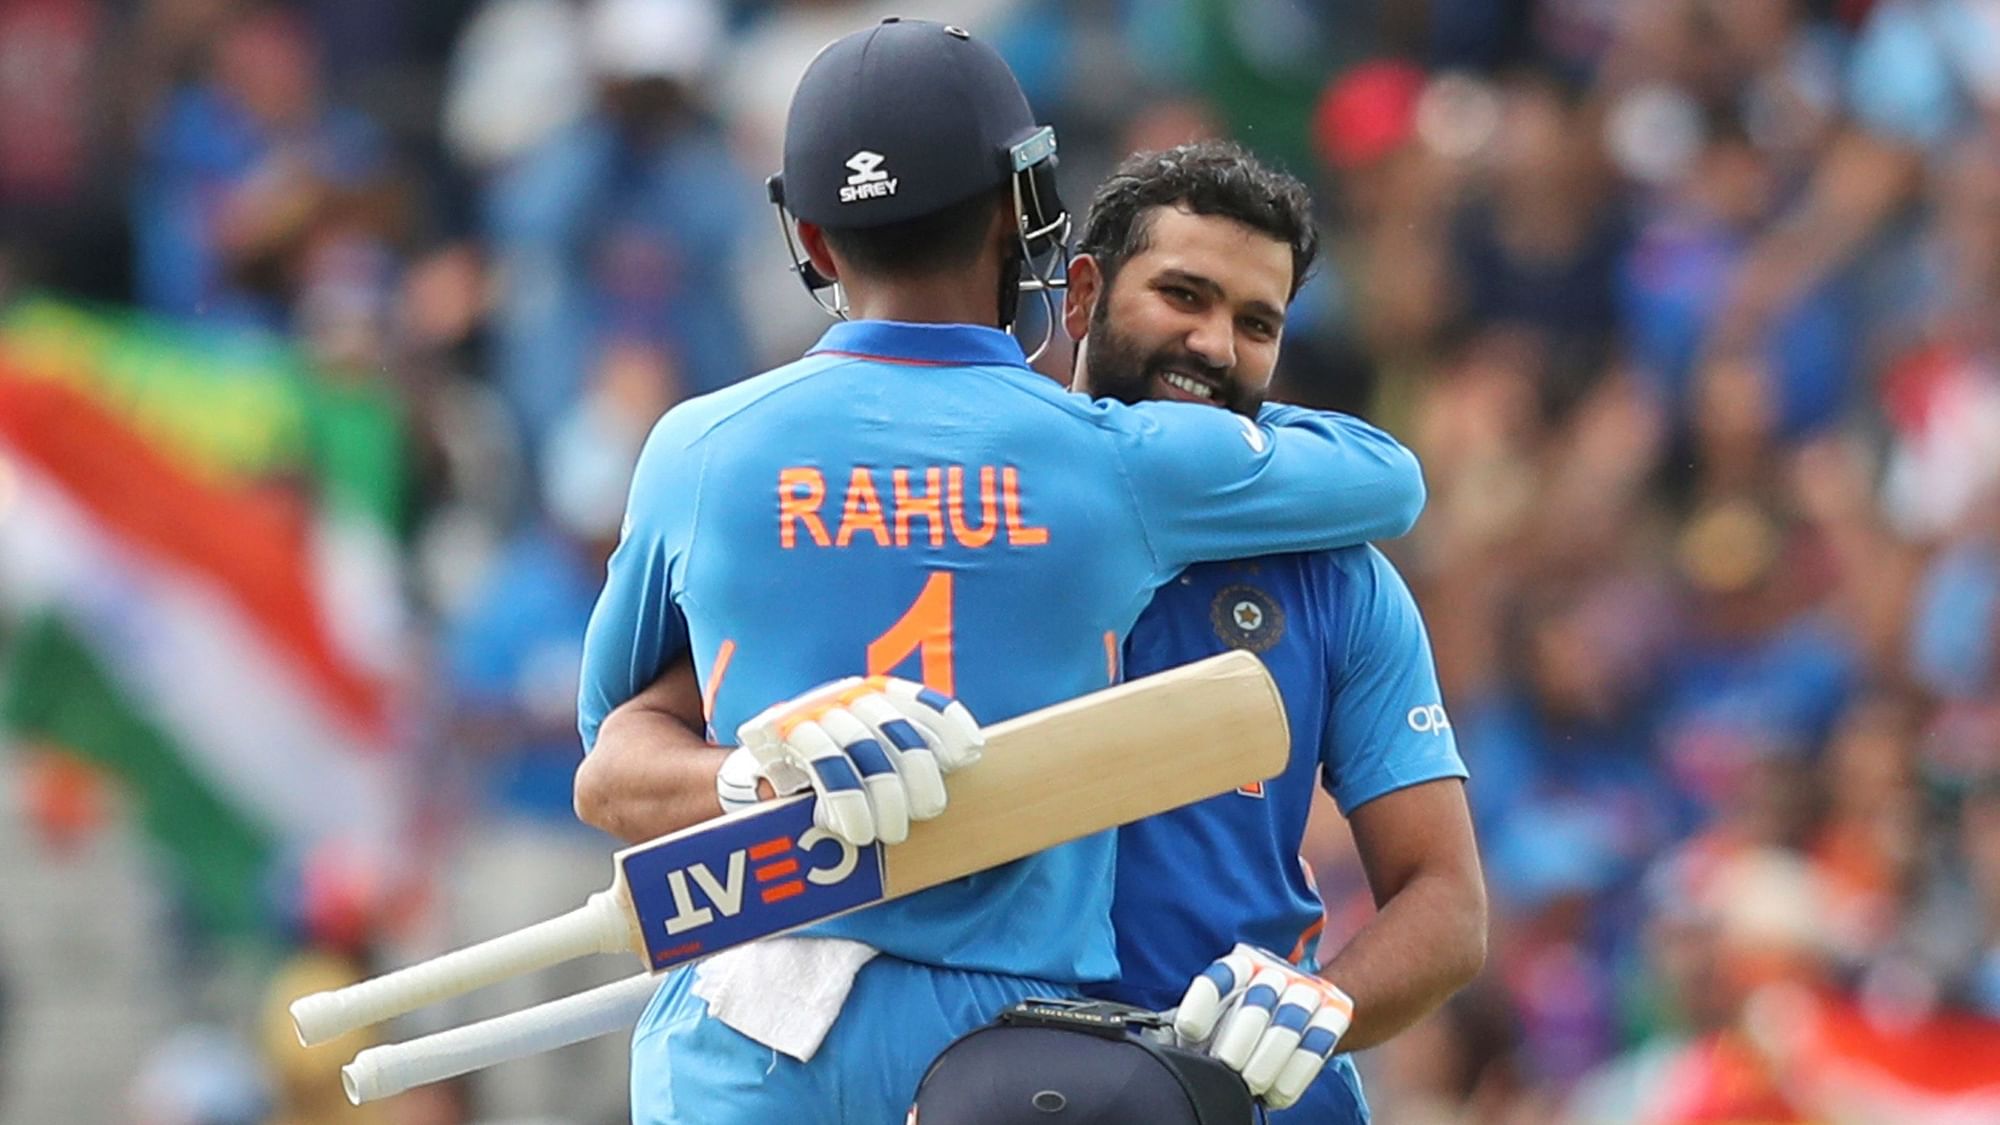 Rahul and Rohit’s partnership against Sri Lanka on Saturday would become India’s highest opening stand in World Cup matches.